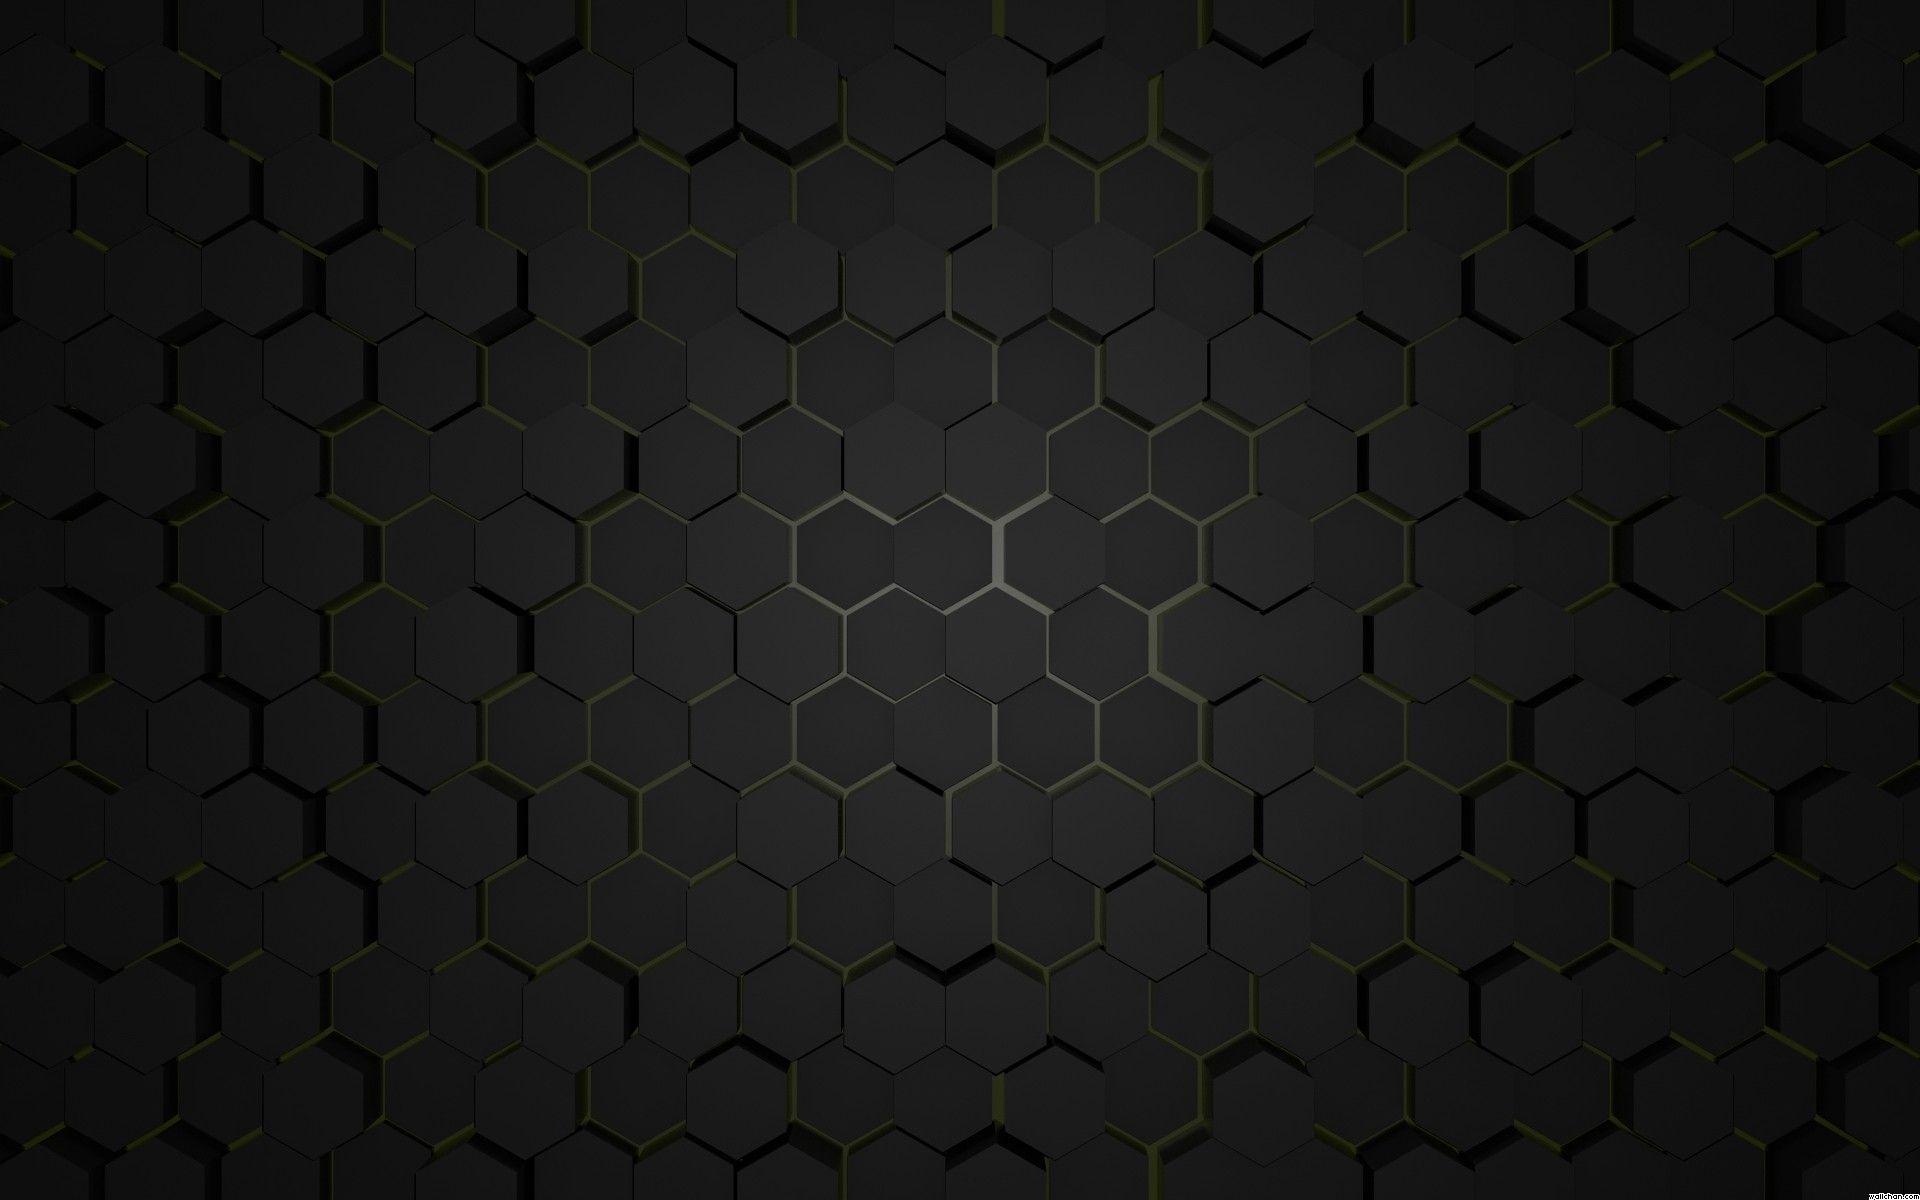  Black  Abstract  Wallpapers  Top Free Black  Abstract  